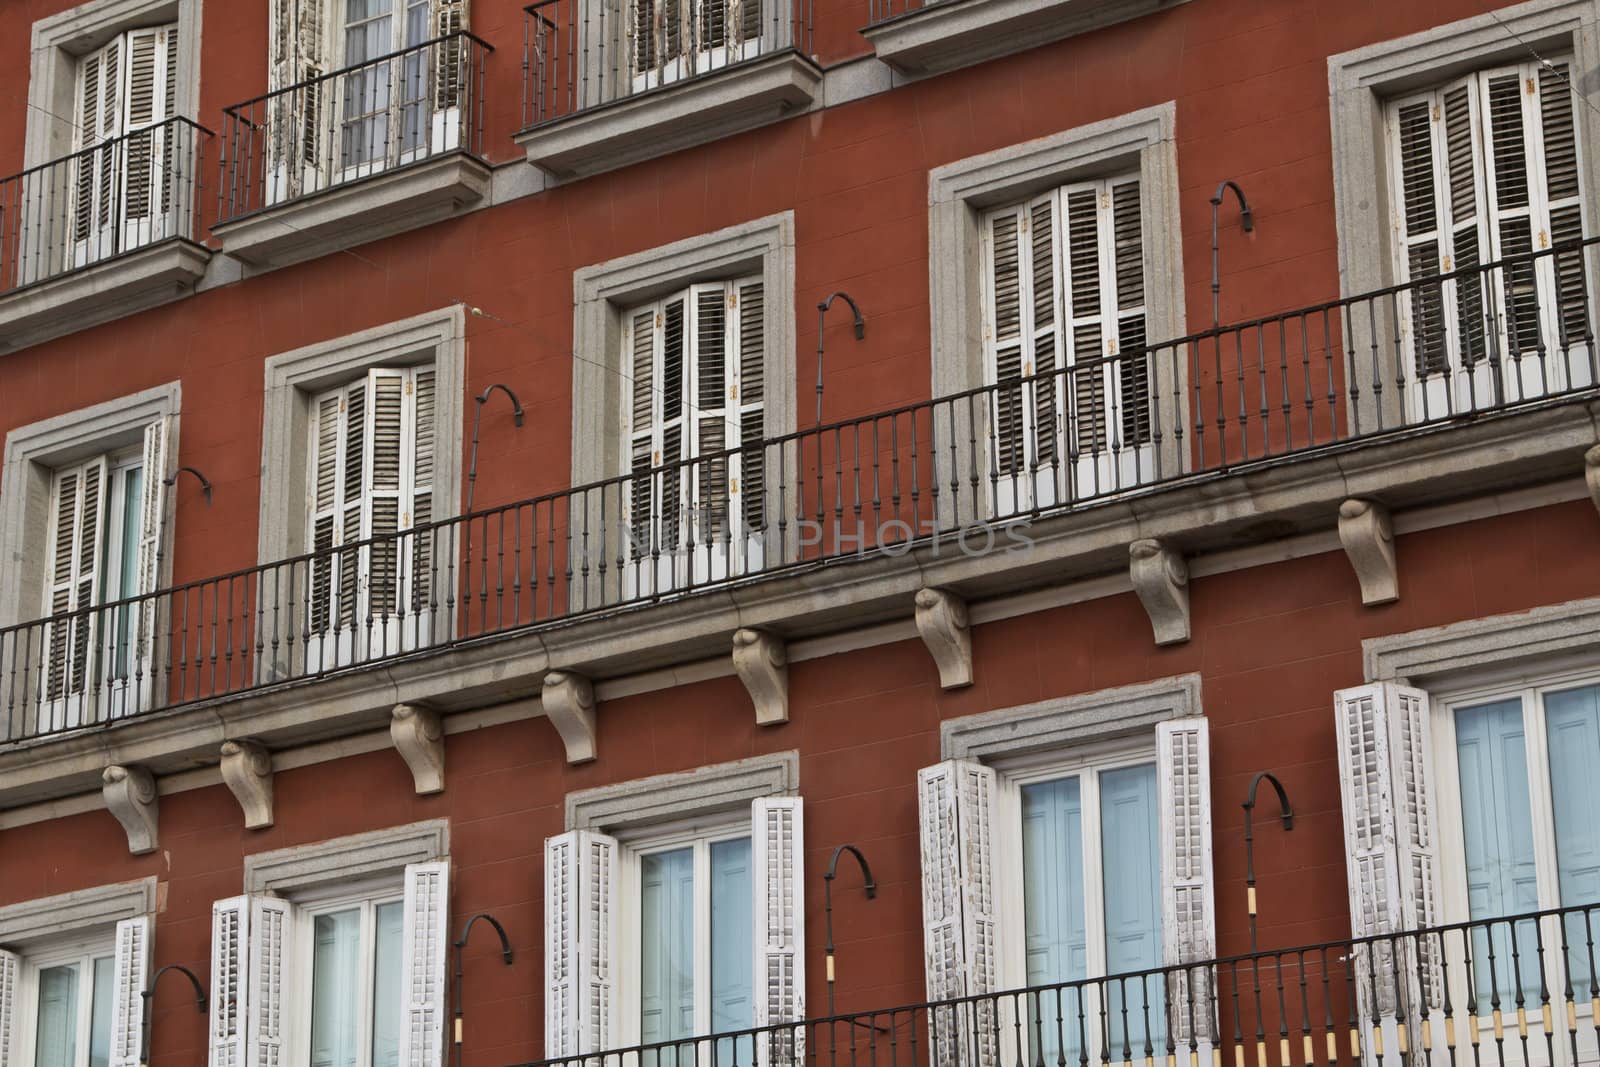 Open and closed windows on Plaza Mayor in Madrid